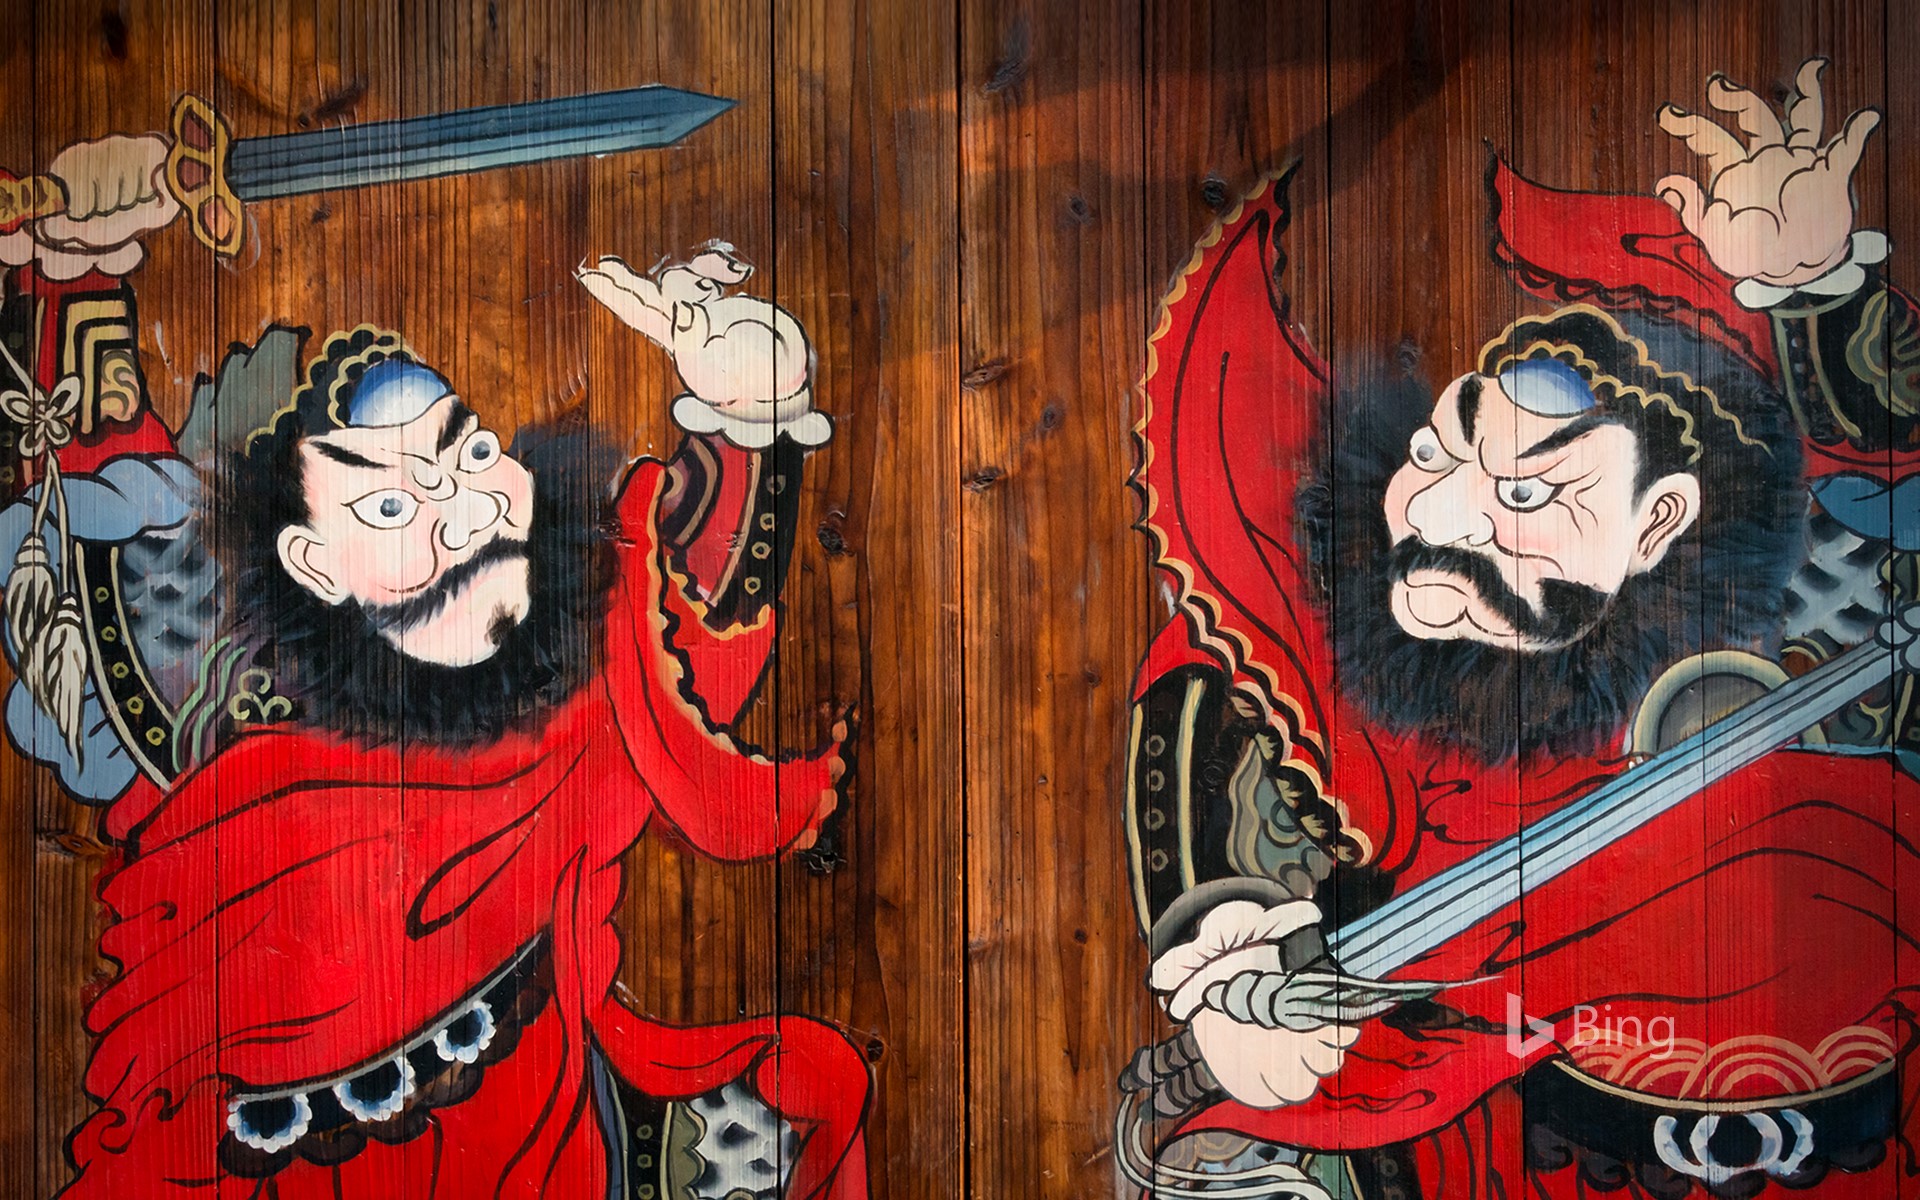 The door god painted in front of a house in Yuehe Ancient Town, Zhejiang